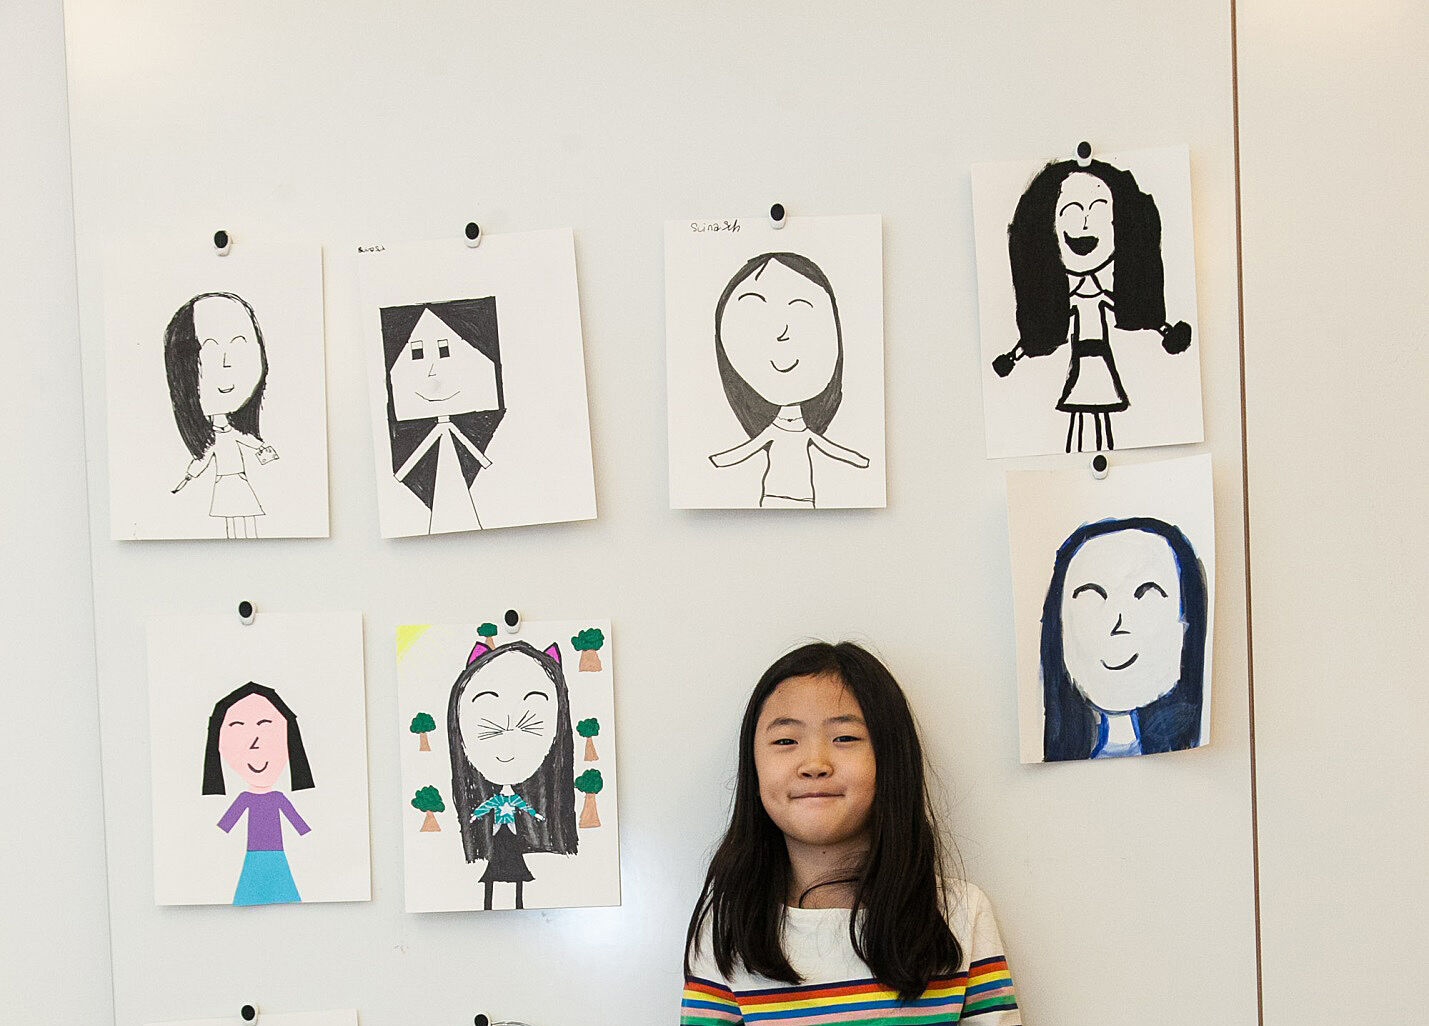 A student posting with self-portraits at art camp